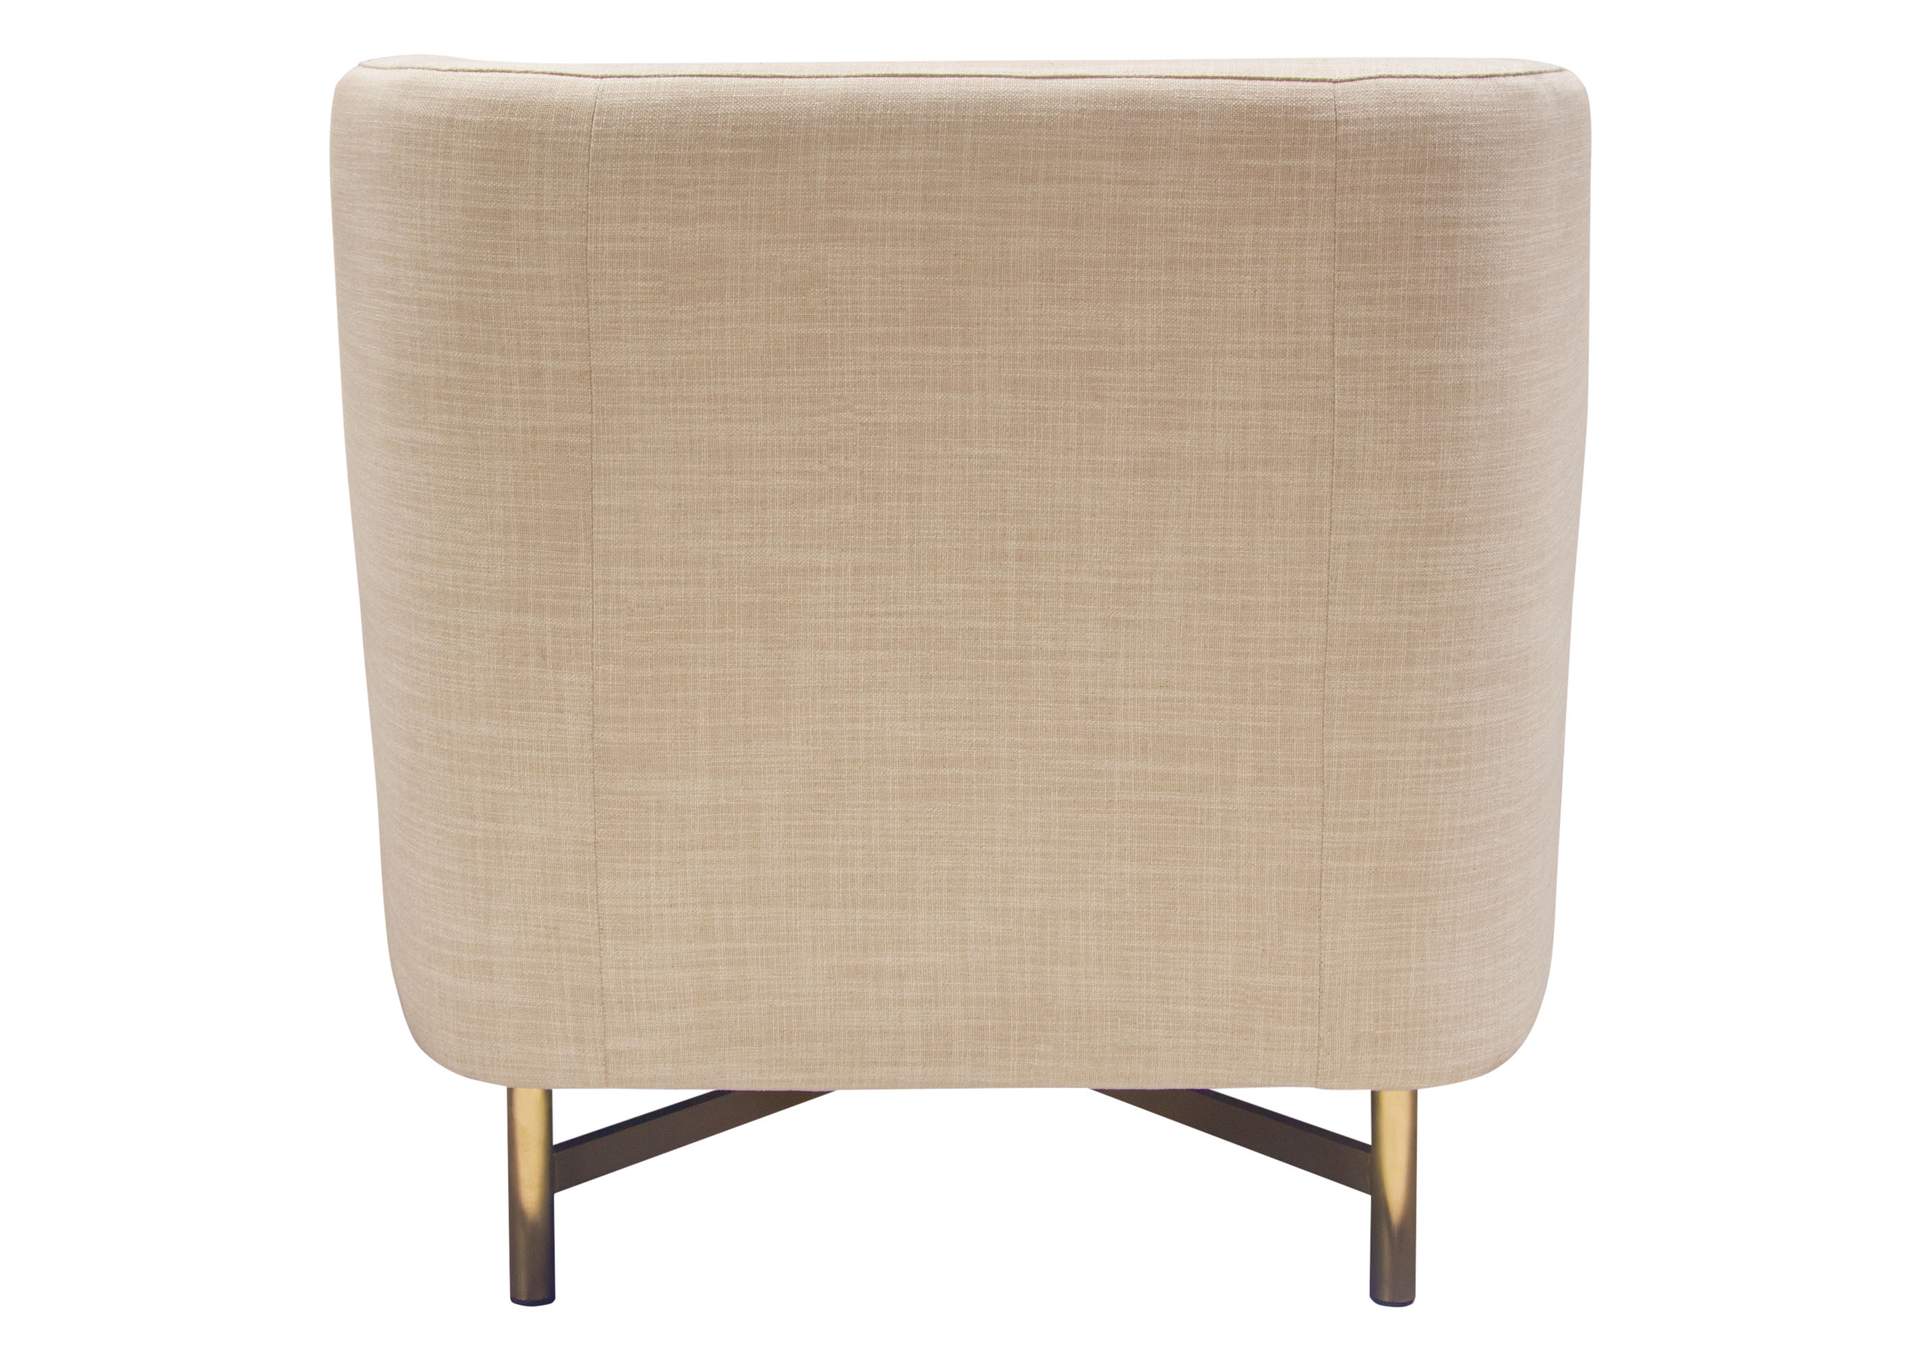 Croft Fabric Chair in Sand Linen Fabric w/ Accent Pillow and Gold Metal Criss-Cross Frame by Diamond Sofa,Diamond Sofa